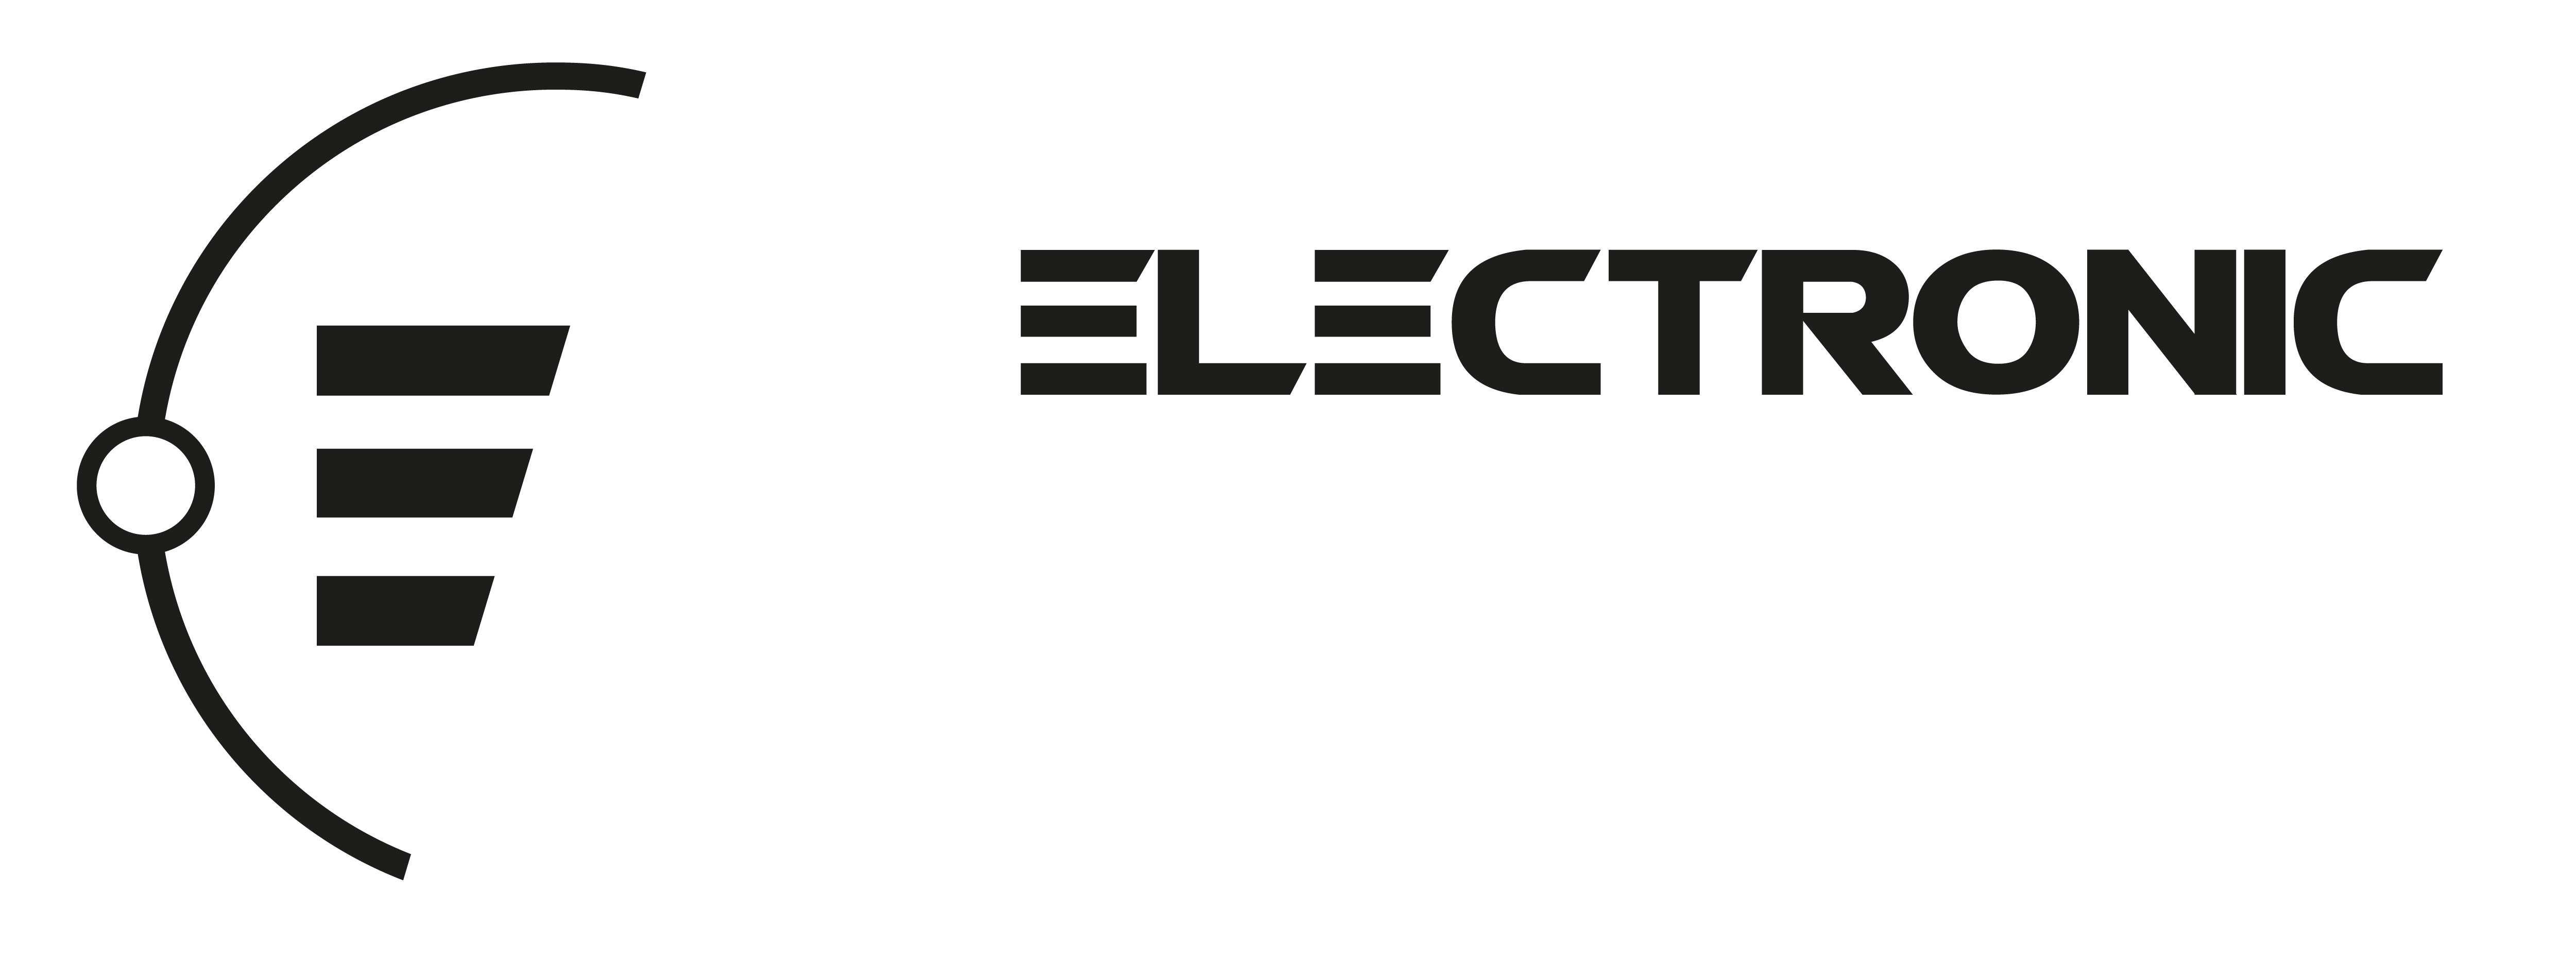 Electronic Store